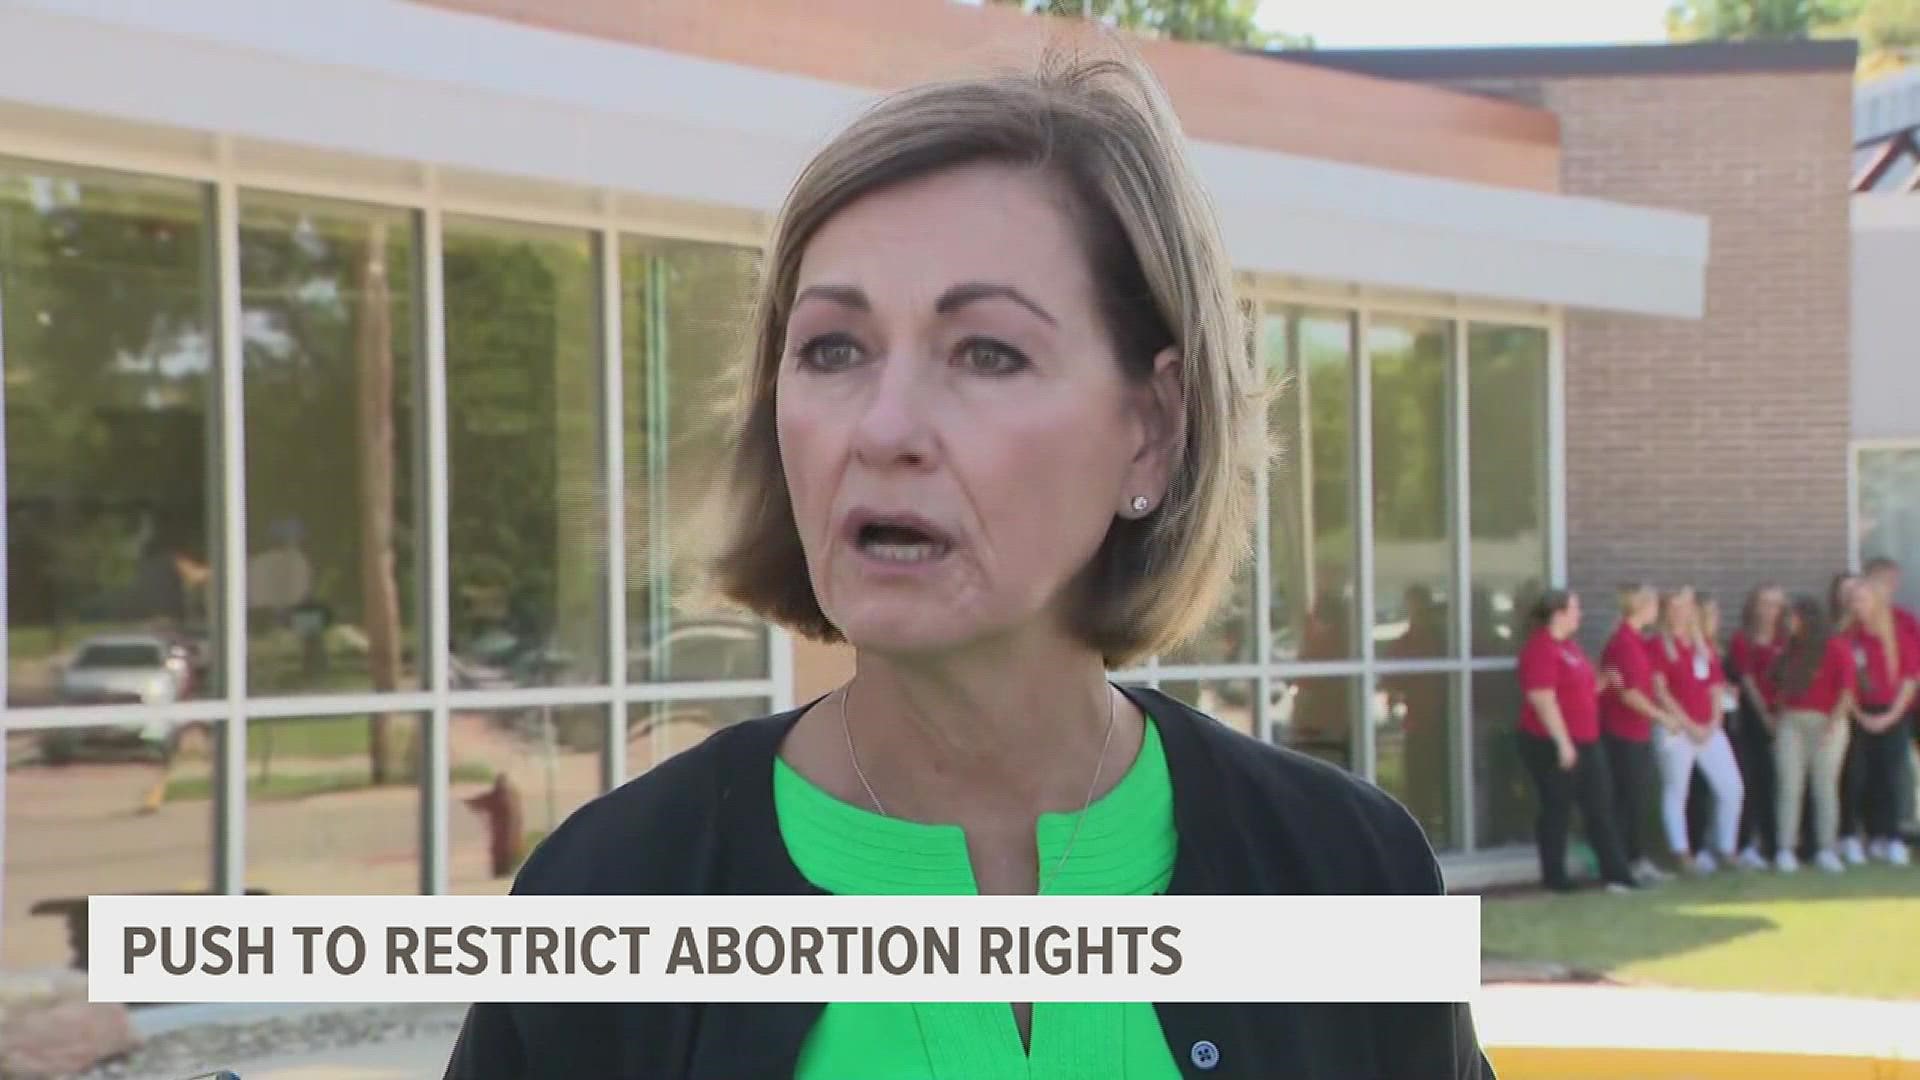 The governor said that the next step in restricting abortions in Iowa is to review the laws in the state courts and not through a special legislative session.